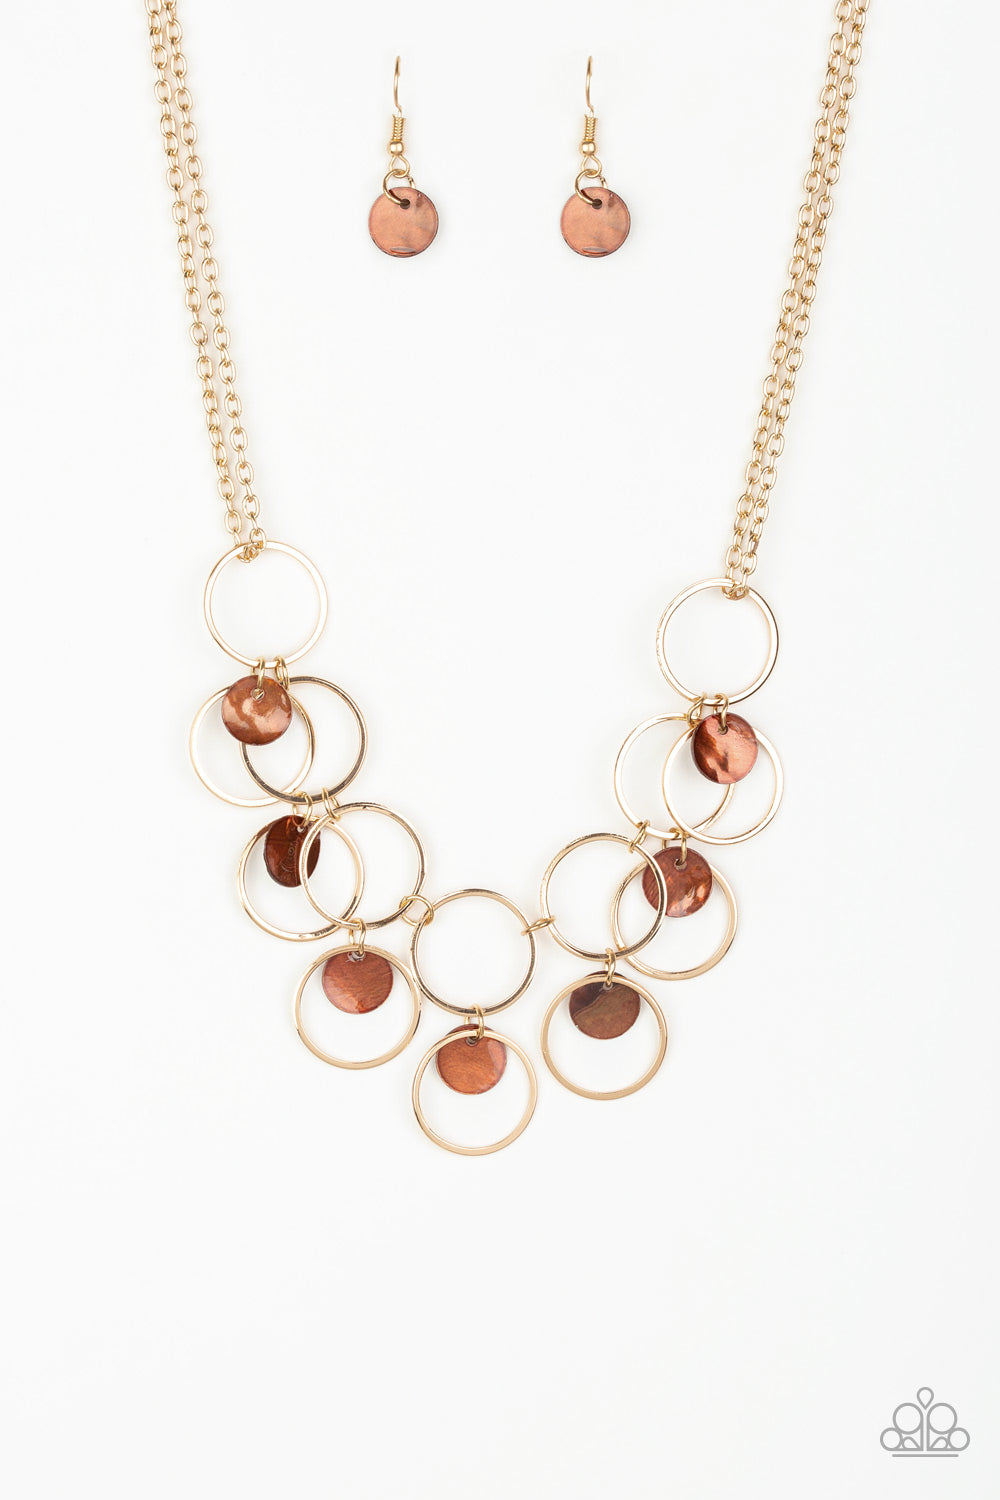 Paparazzi Necklace Ask And You Shell Receive - Brown